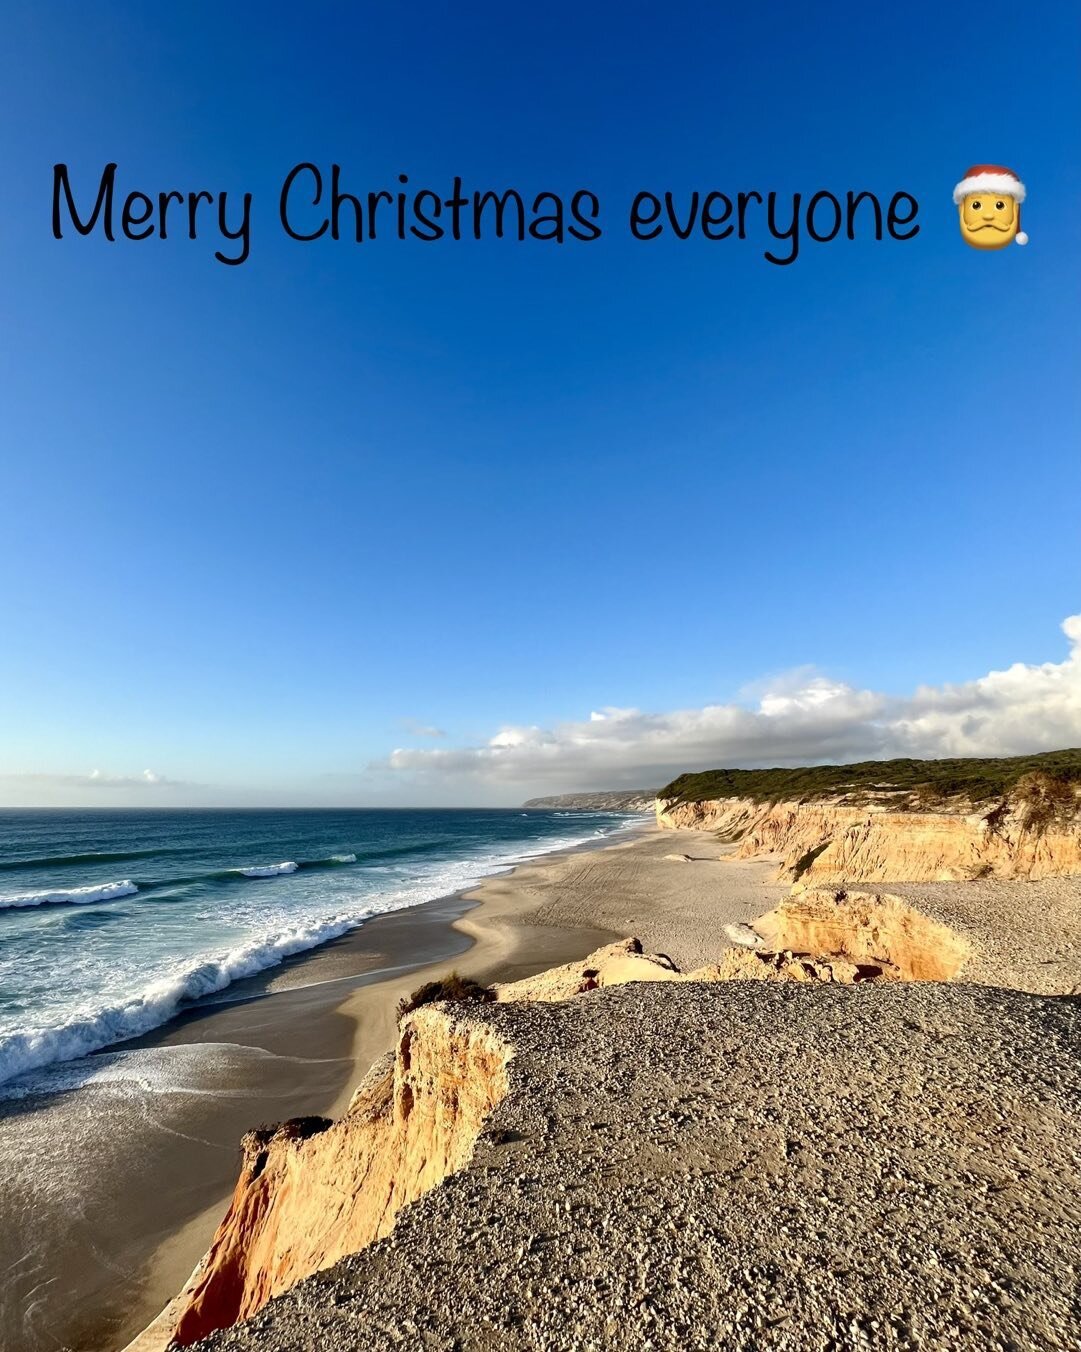 Merry Christmas everyone🎄 We wish you all the best and a lot of windy days!
.
.
.
#merrychristmas #portugal #holidays #bestwishes #kitesurfschool 
www.kitecontrolportugal.com